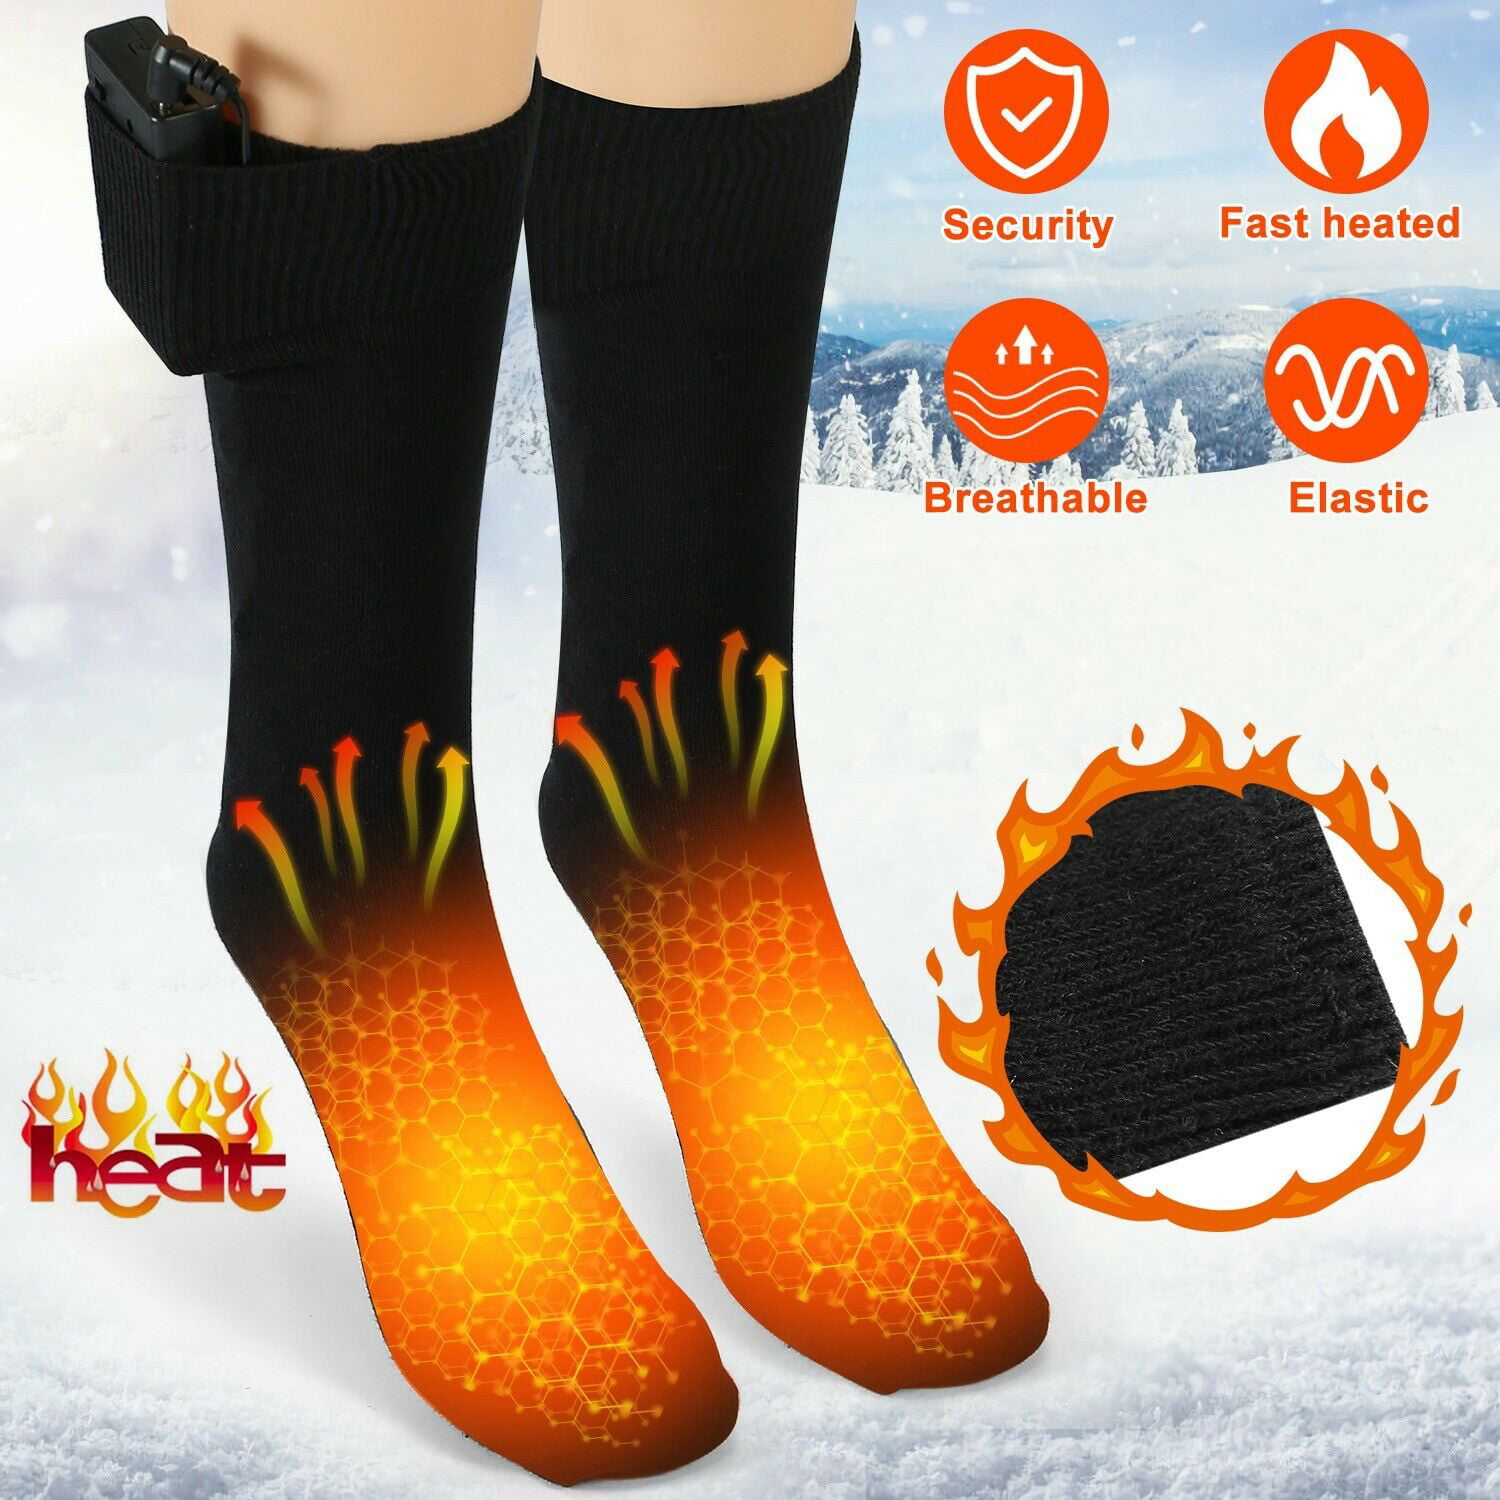 Black Winter Warm Soft Cotton Heating Thermal Socks for Men Women Outdoor Riding Camping Hiking Motorcycle Skiing Rechargeable Electric Heated Socks 